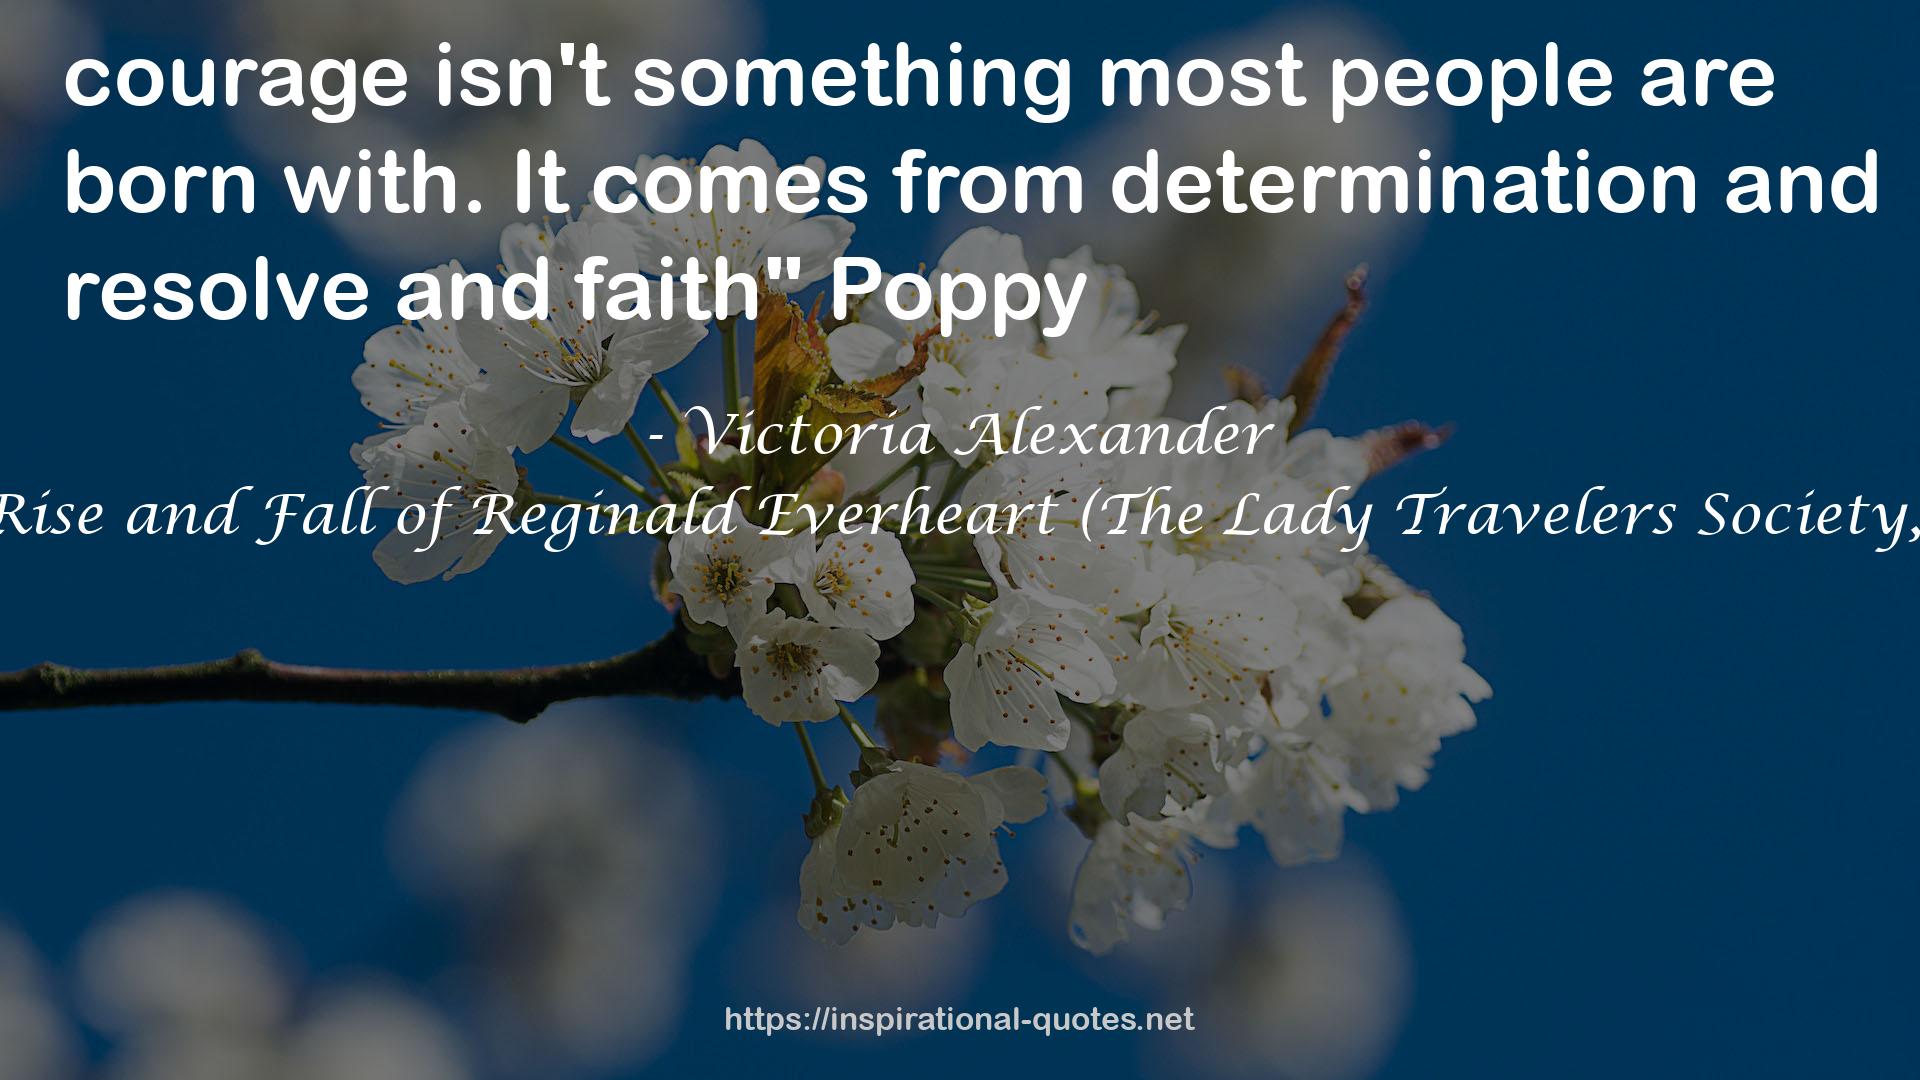 The Rise and Fall of Reginald Everheart (The Lady Travelers Society, #1.5) QUOTES